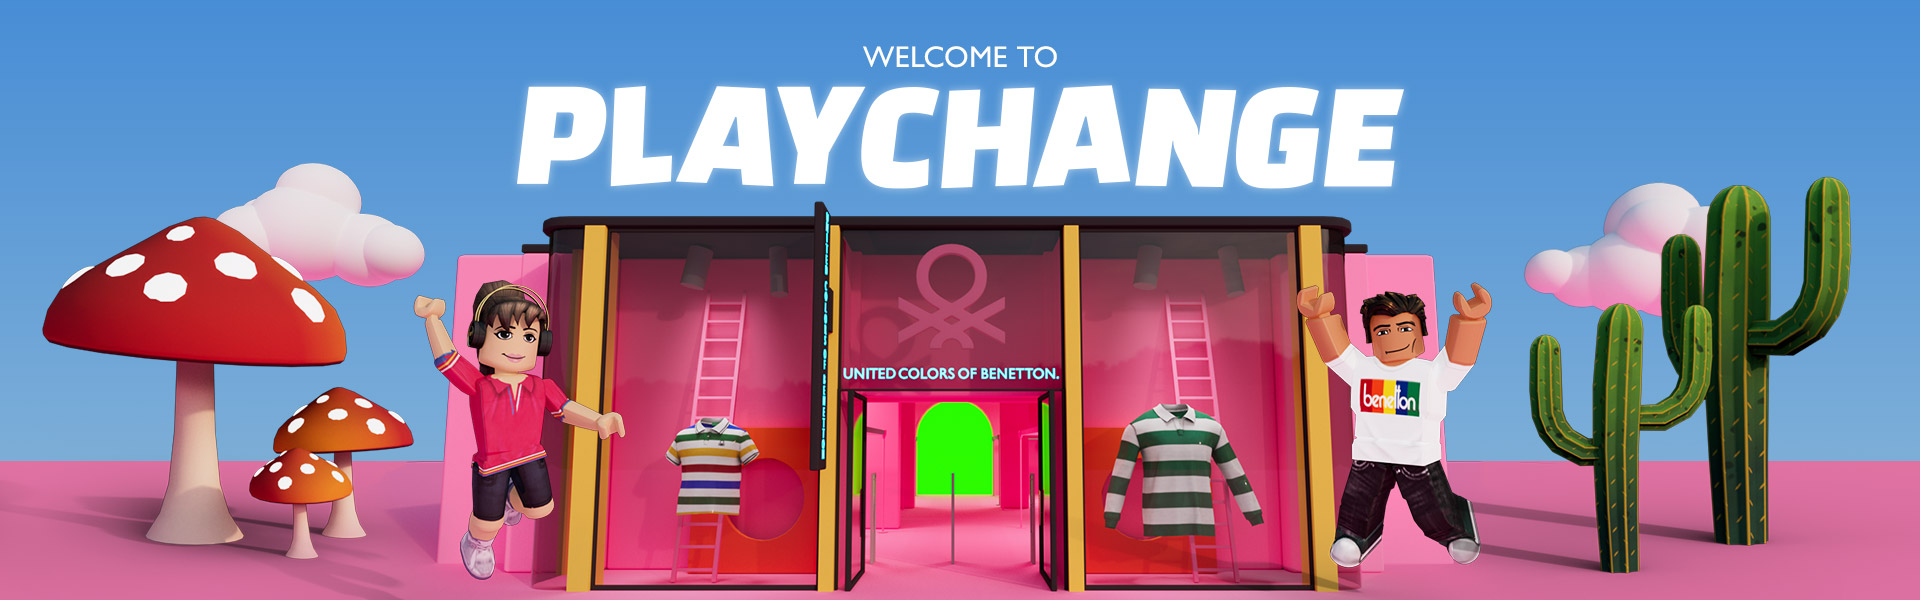 Enter PlayChange and explore the new virtual store